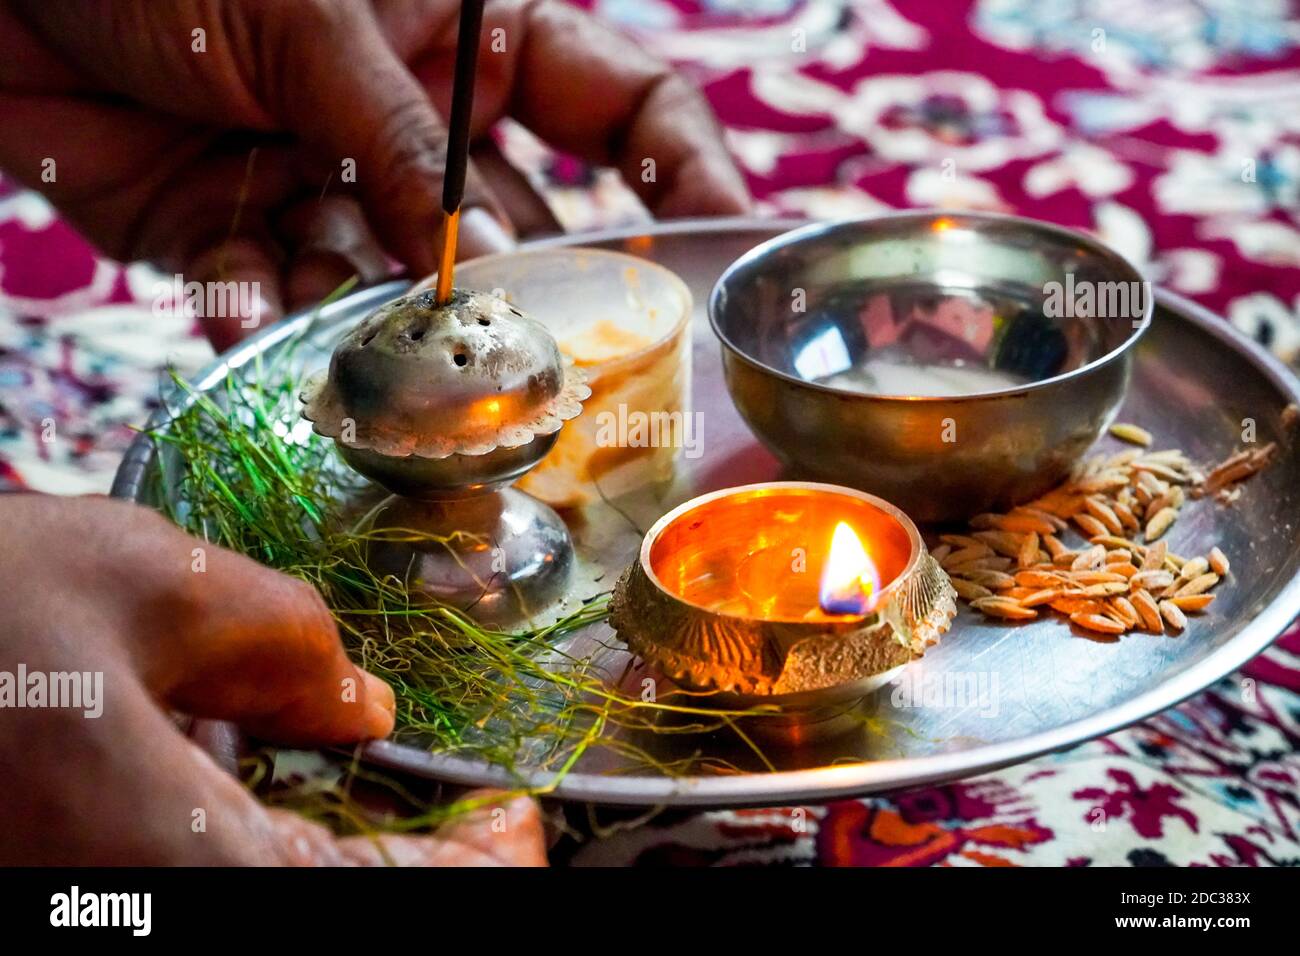 Picture of puja ki thali with the hands holding it. Stock Photo